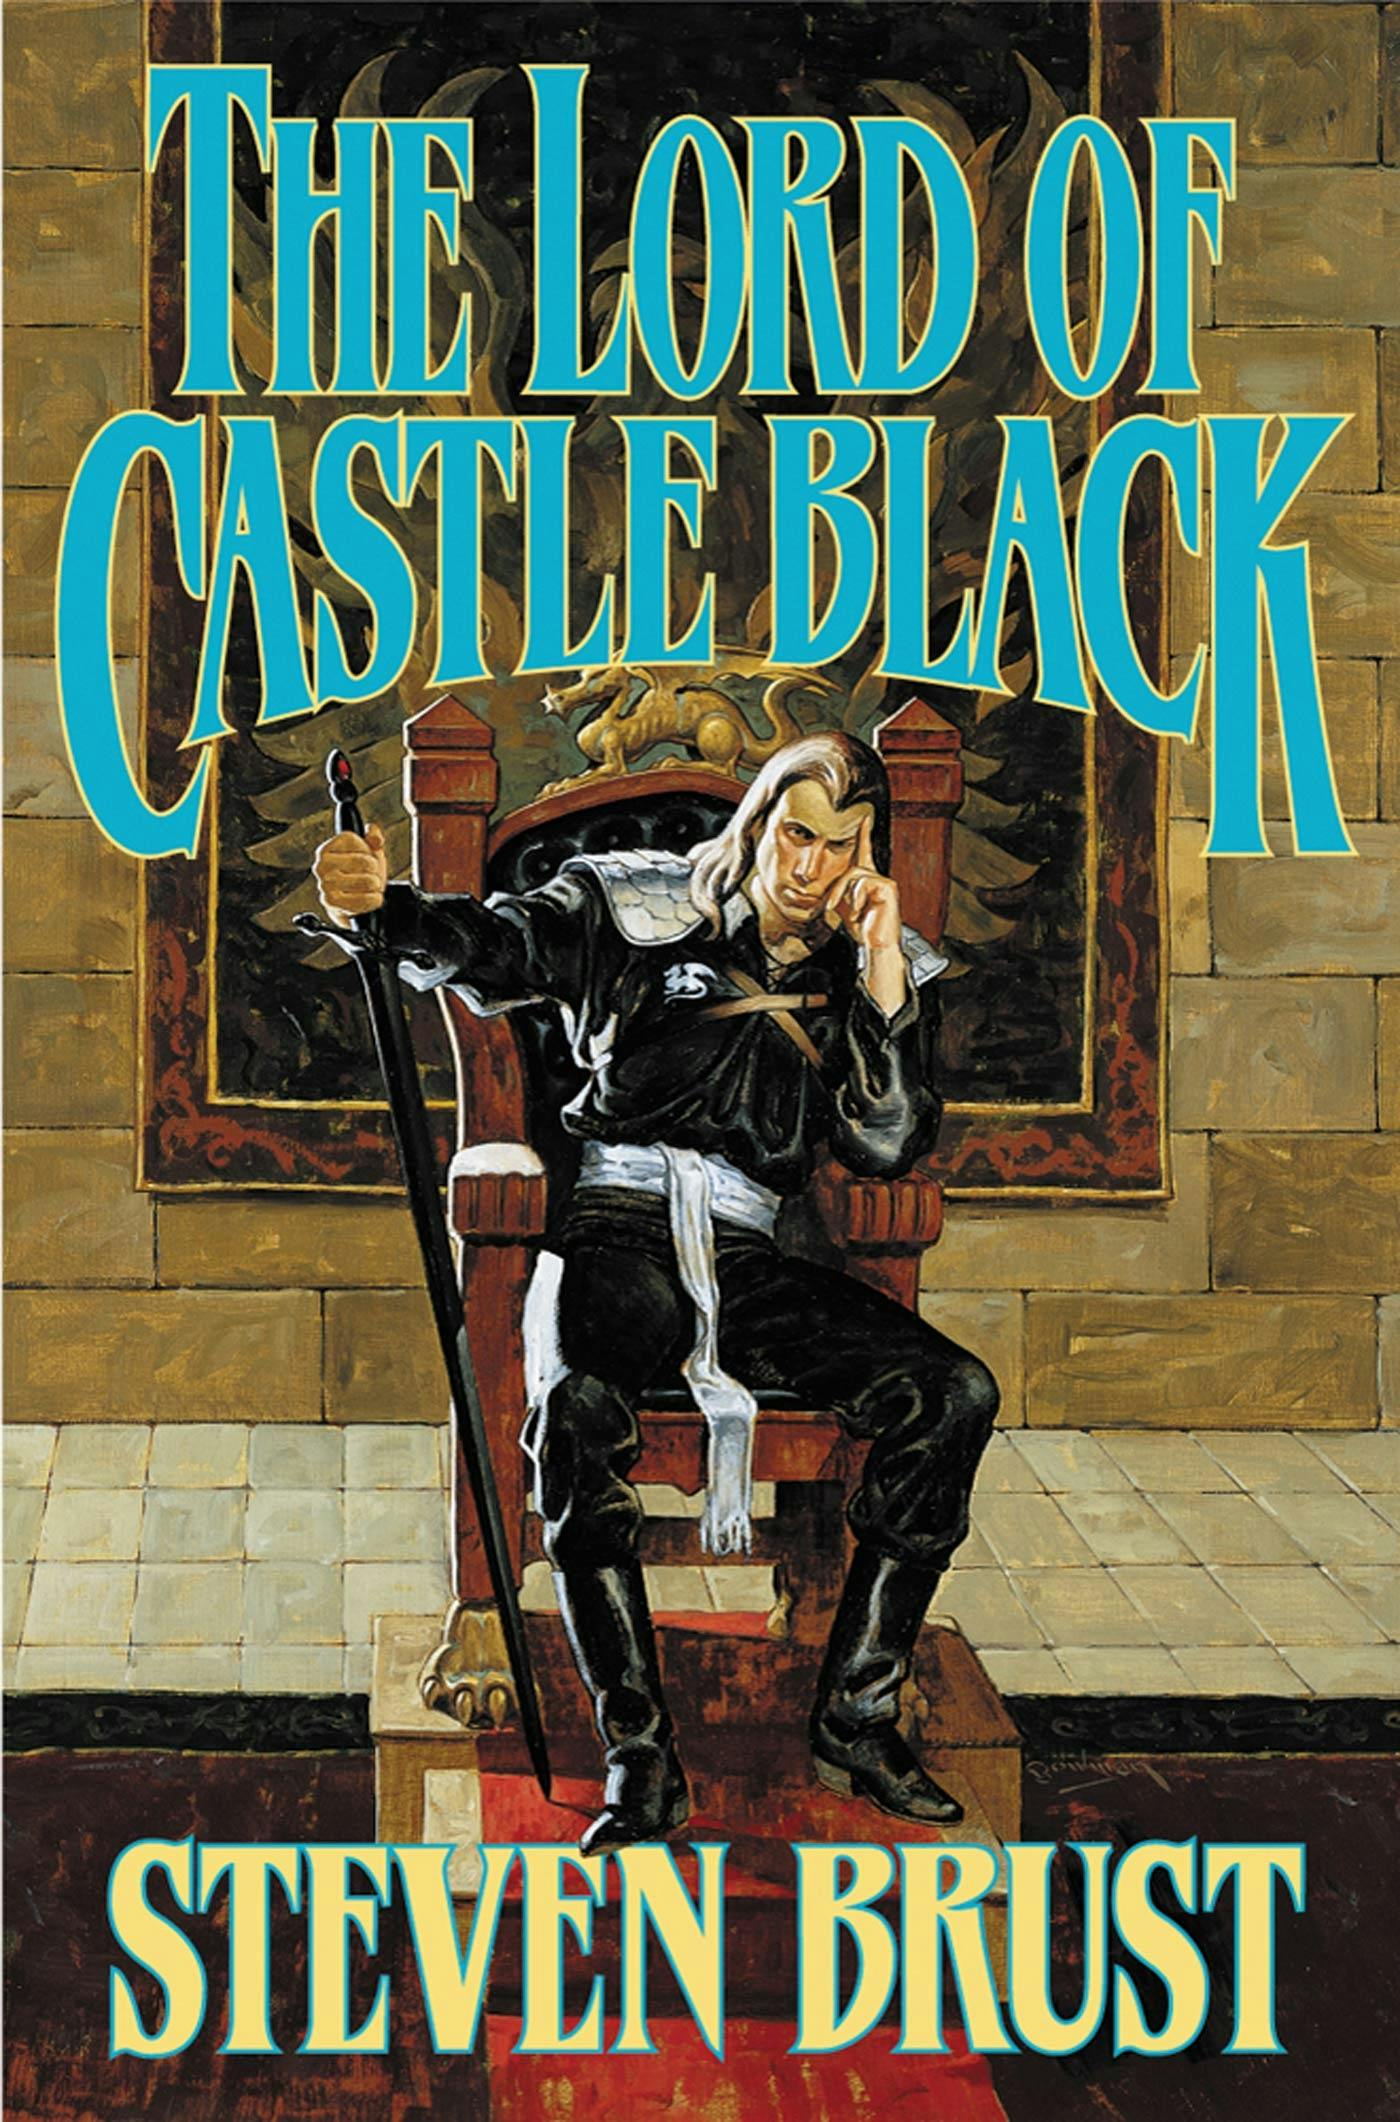 Image of The Lord of Castle Black